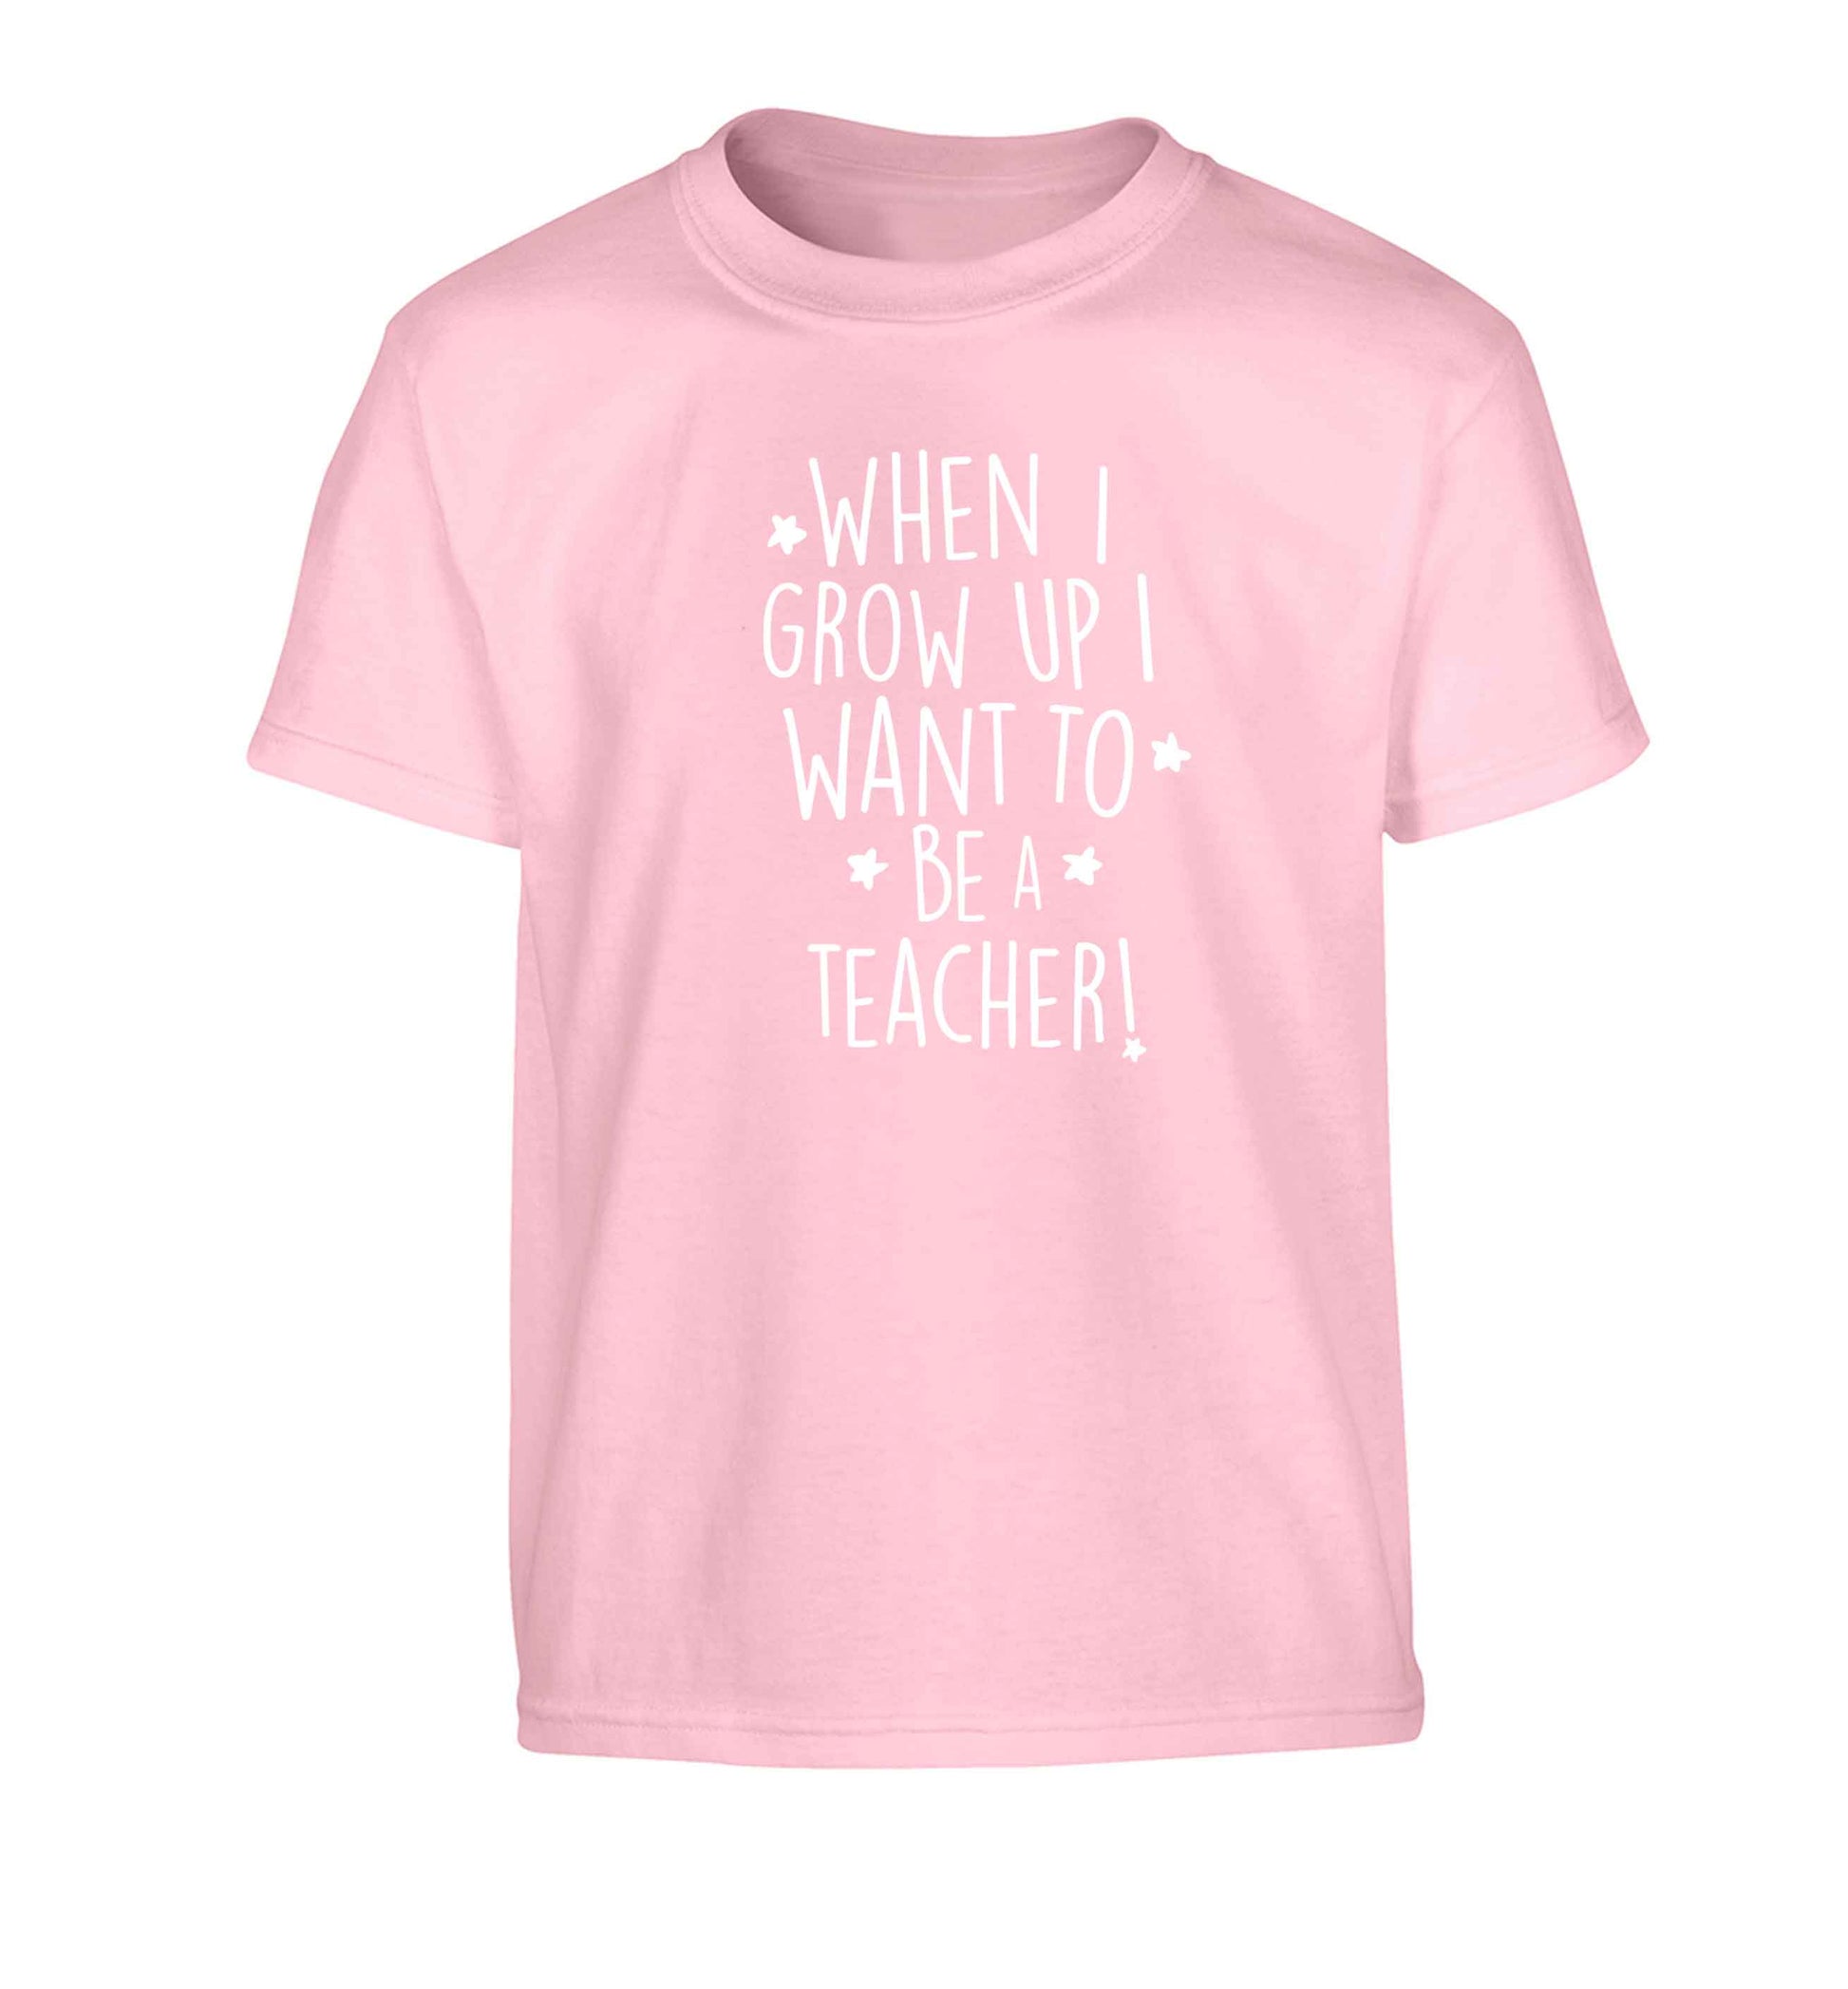 When I grow up I want to be a teacher Children's light pink Tshirt 12-13 Years